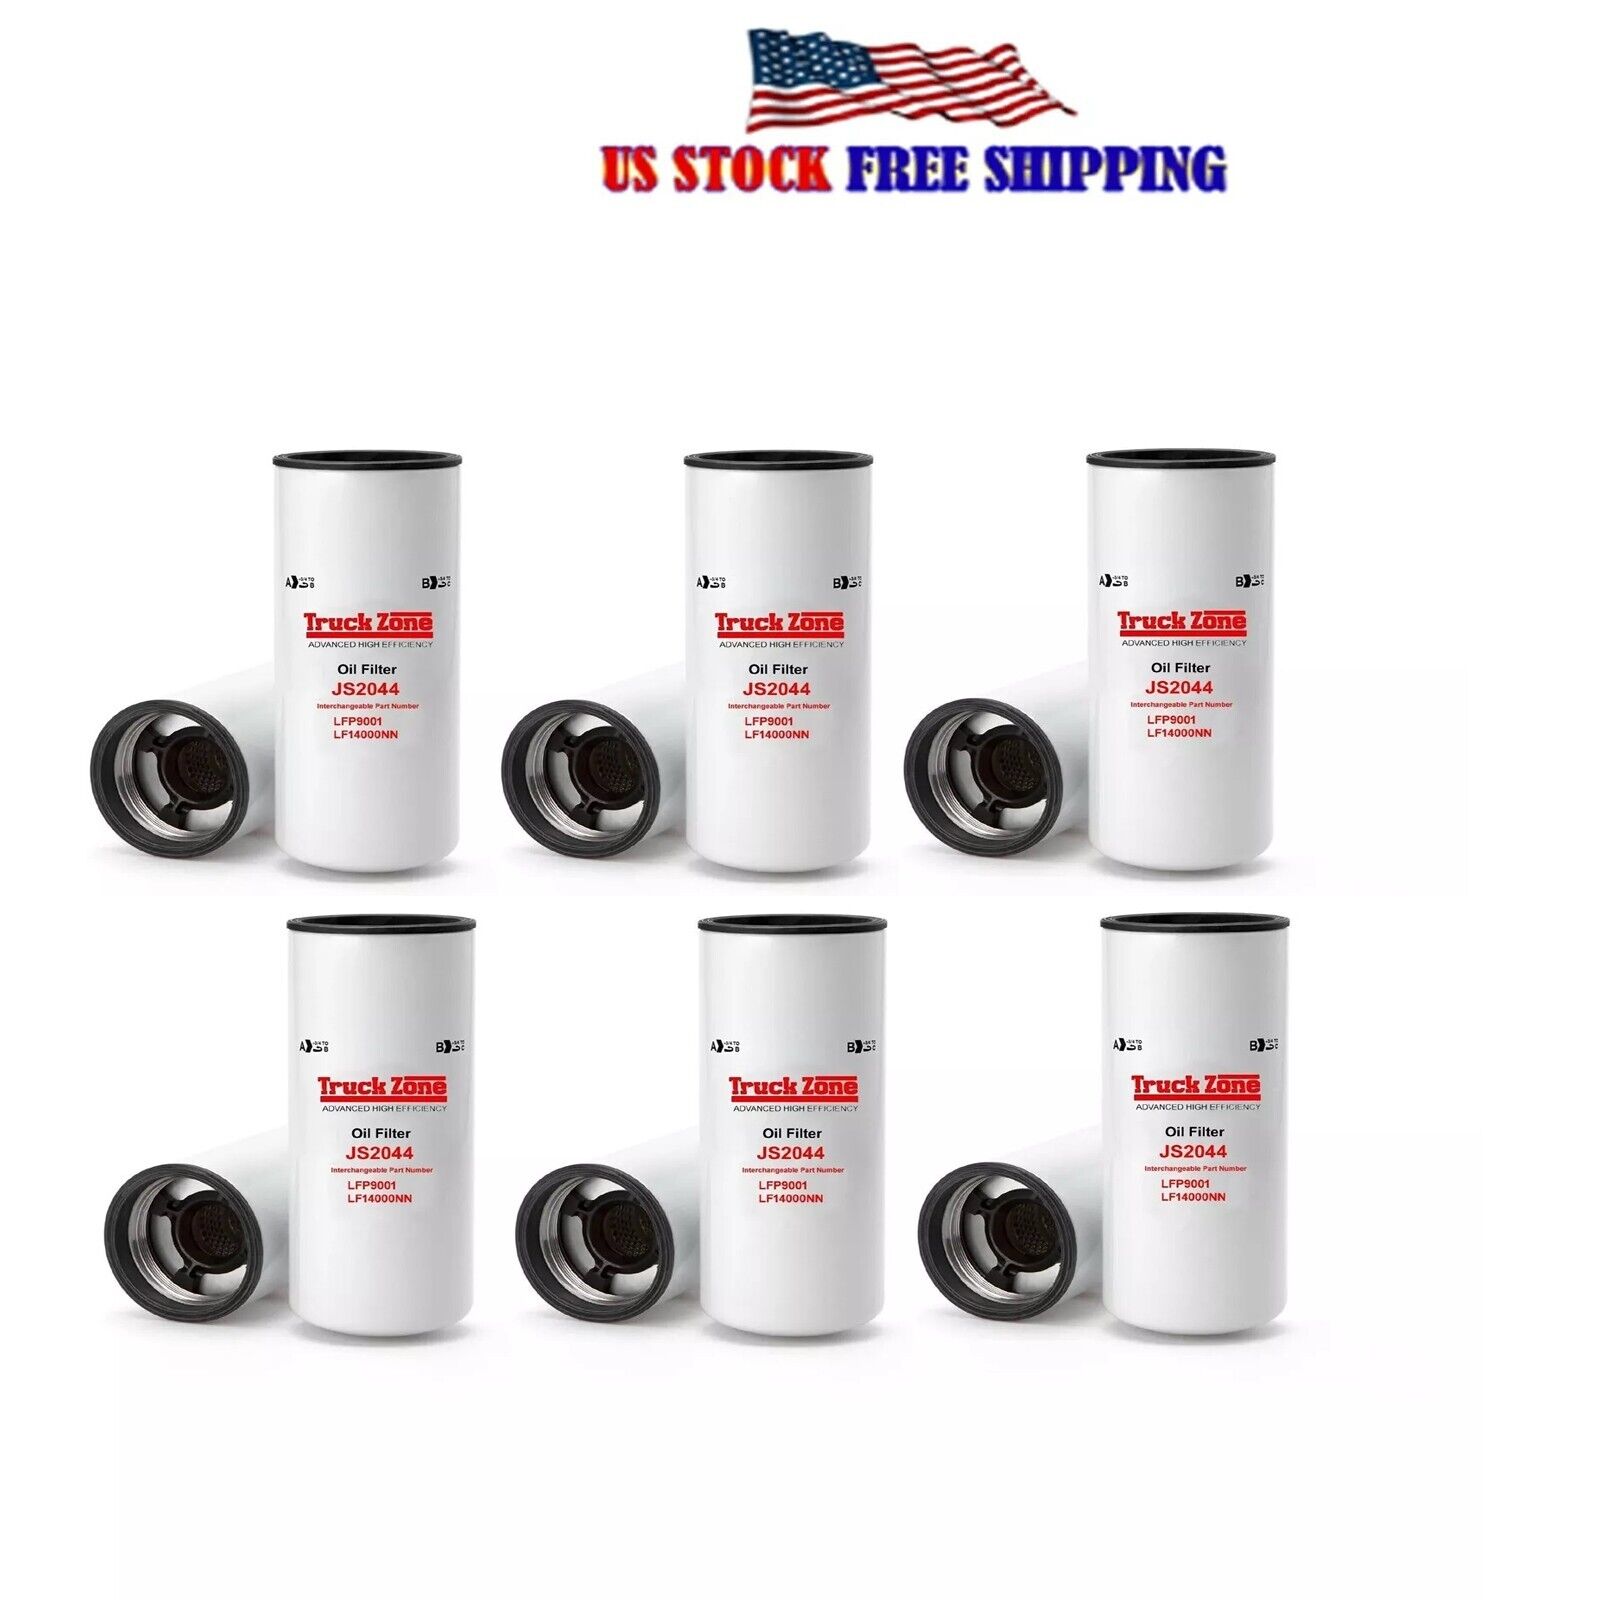 LFP9001-Engine Oil Filter Replaces LF14000NN, LFP9001 PH8691 LF9001 (Pack of 6)